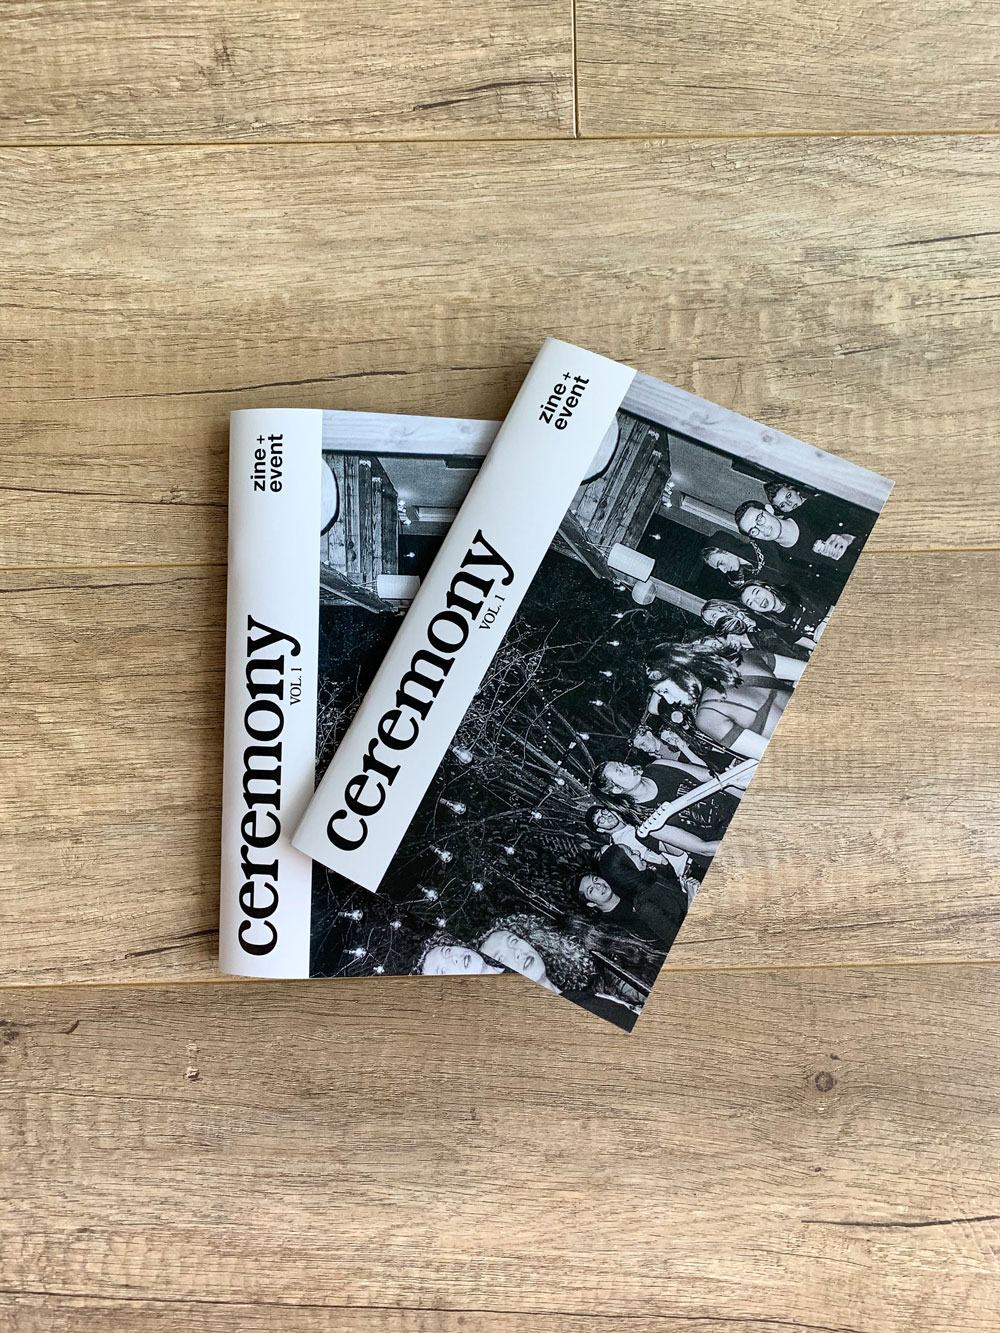 two copies of the print version of the ceremony, VOL. 1 zine